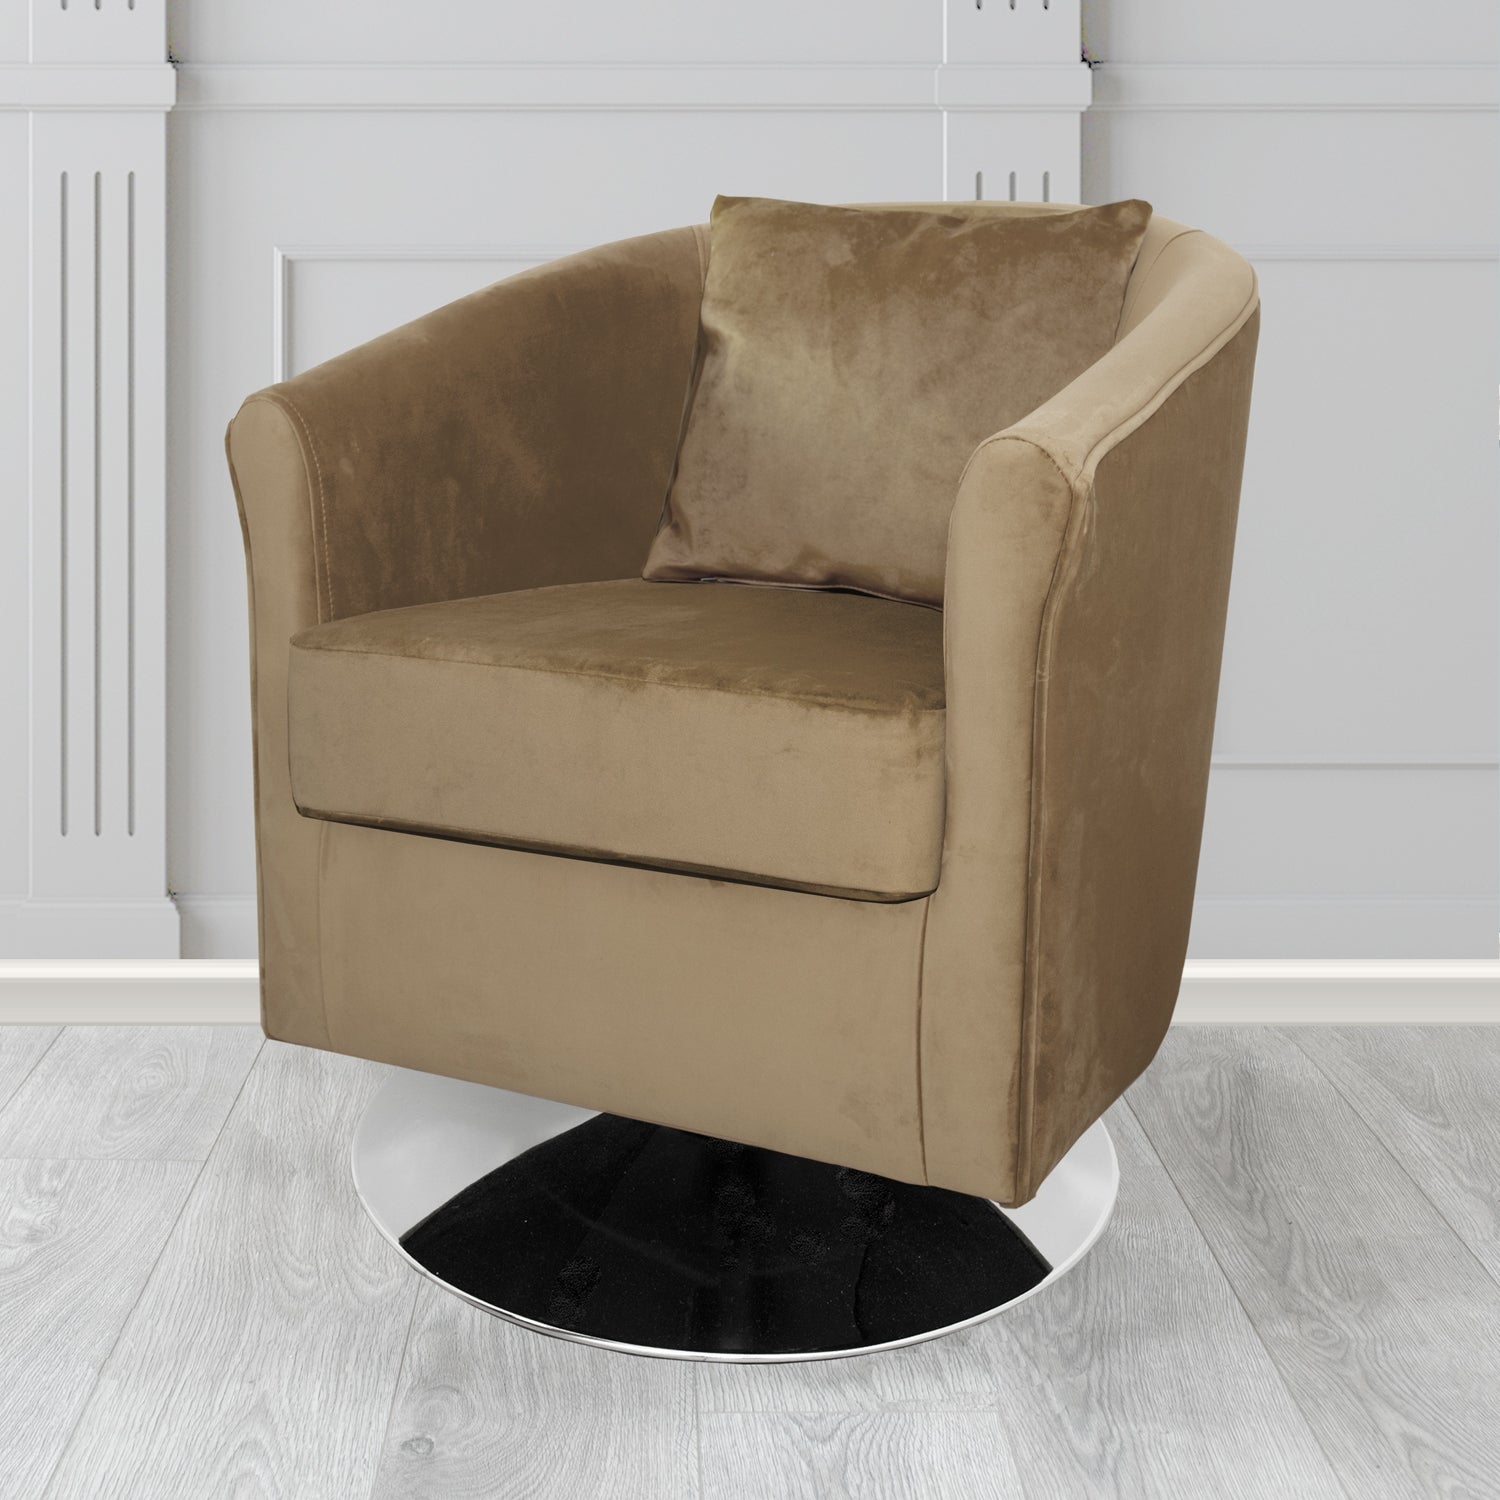 St Tropez Monaco Biscuit Plush Velvet Fabric Swivel Tub Chair with Scatter Cushion (6604933496874)